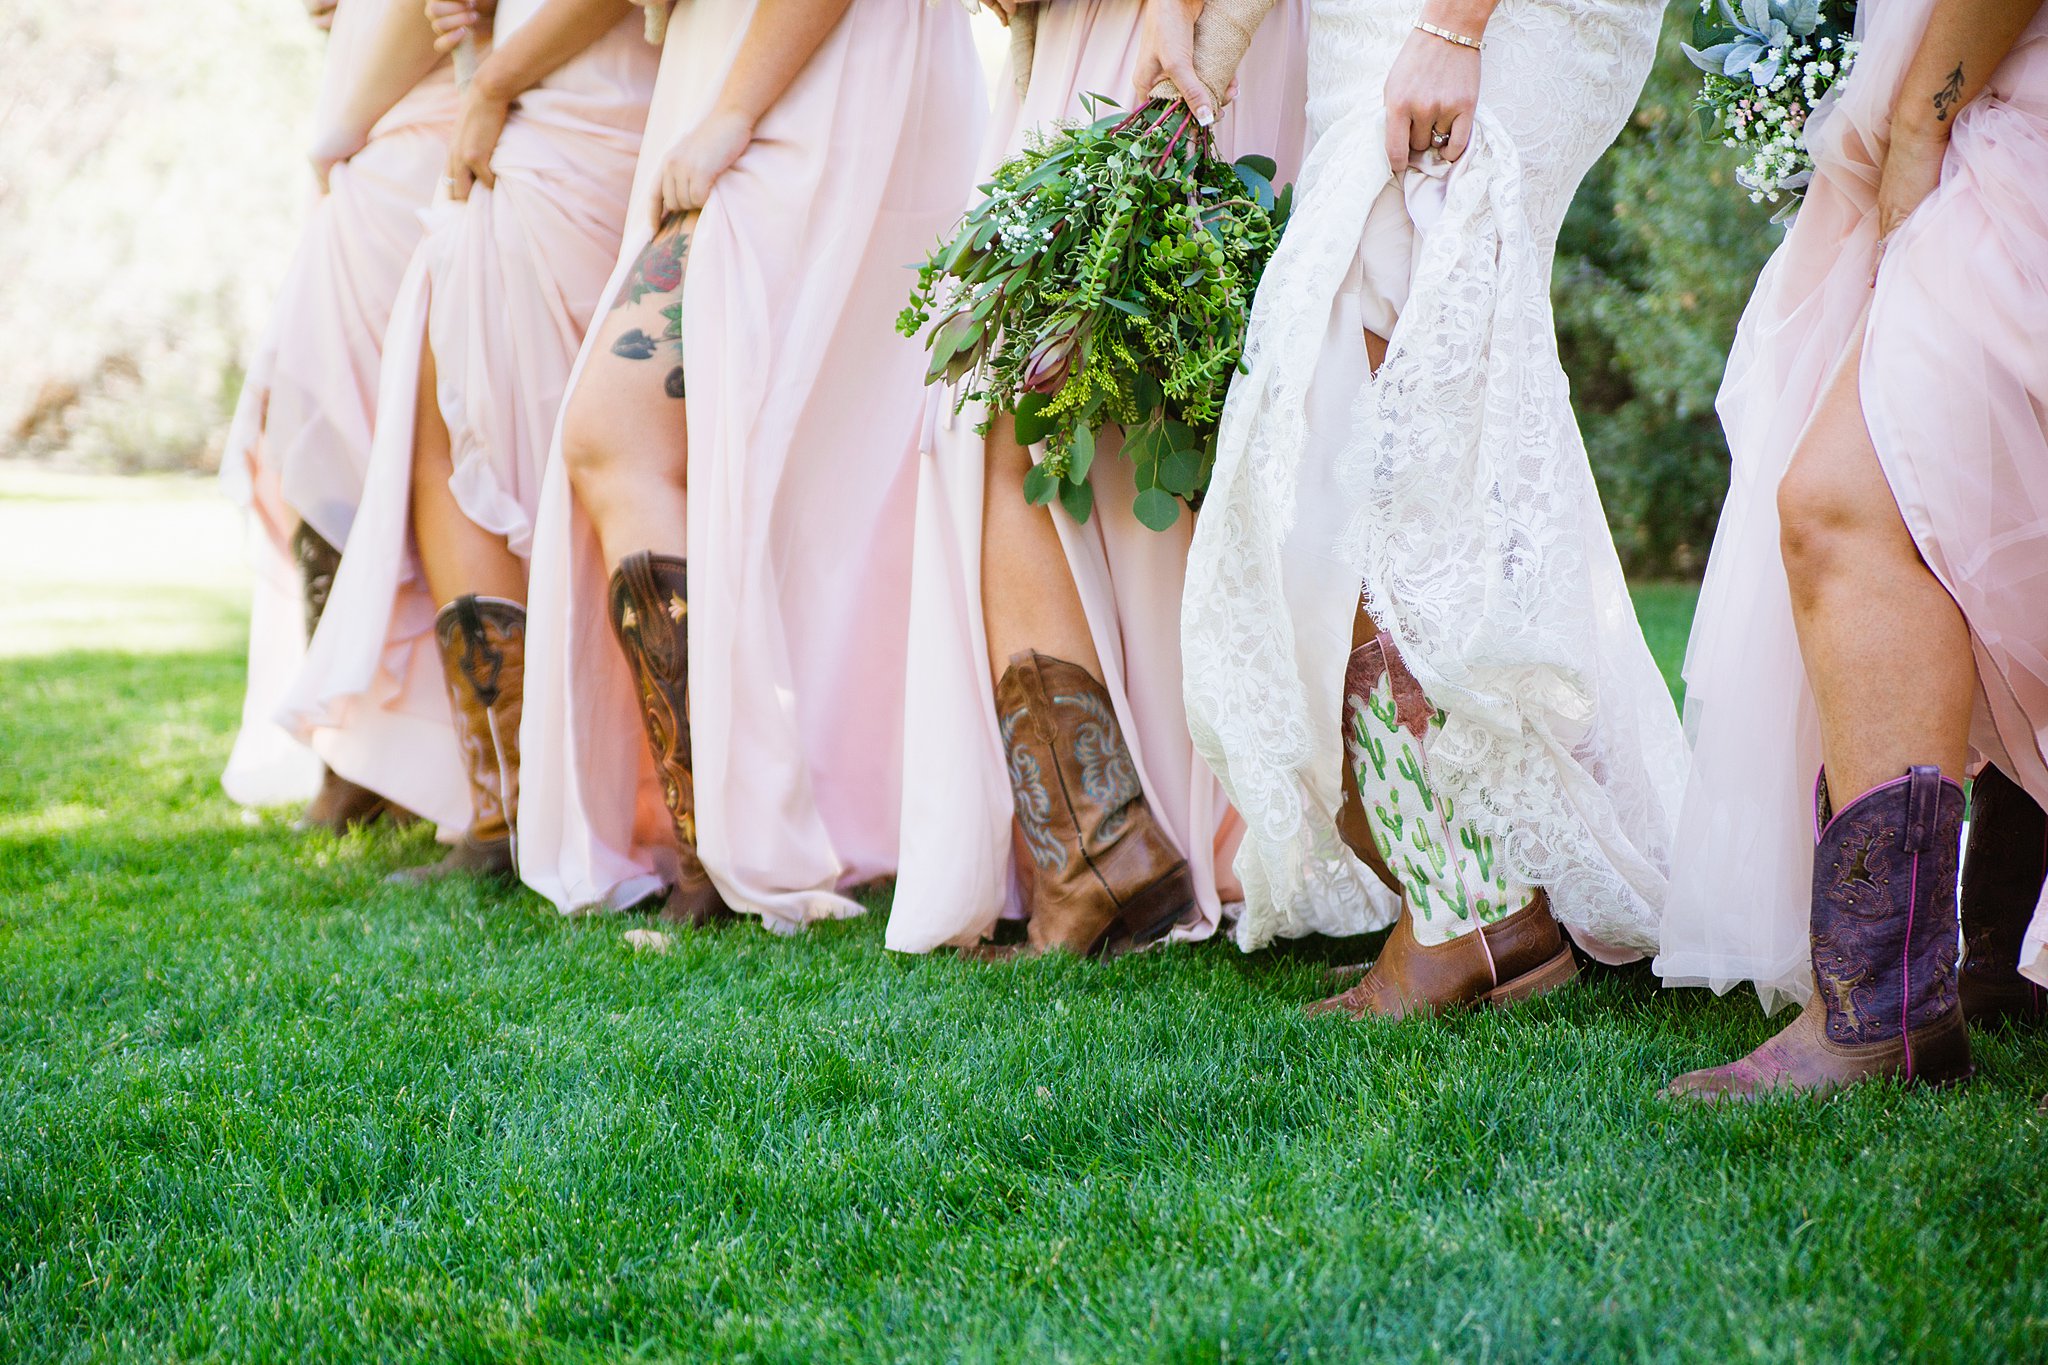 Bridesmaids and bride show off their boots under their wedding dresses for a Van Dickson Ranch wedding by PMA Photography.